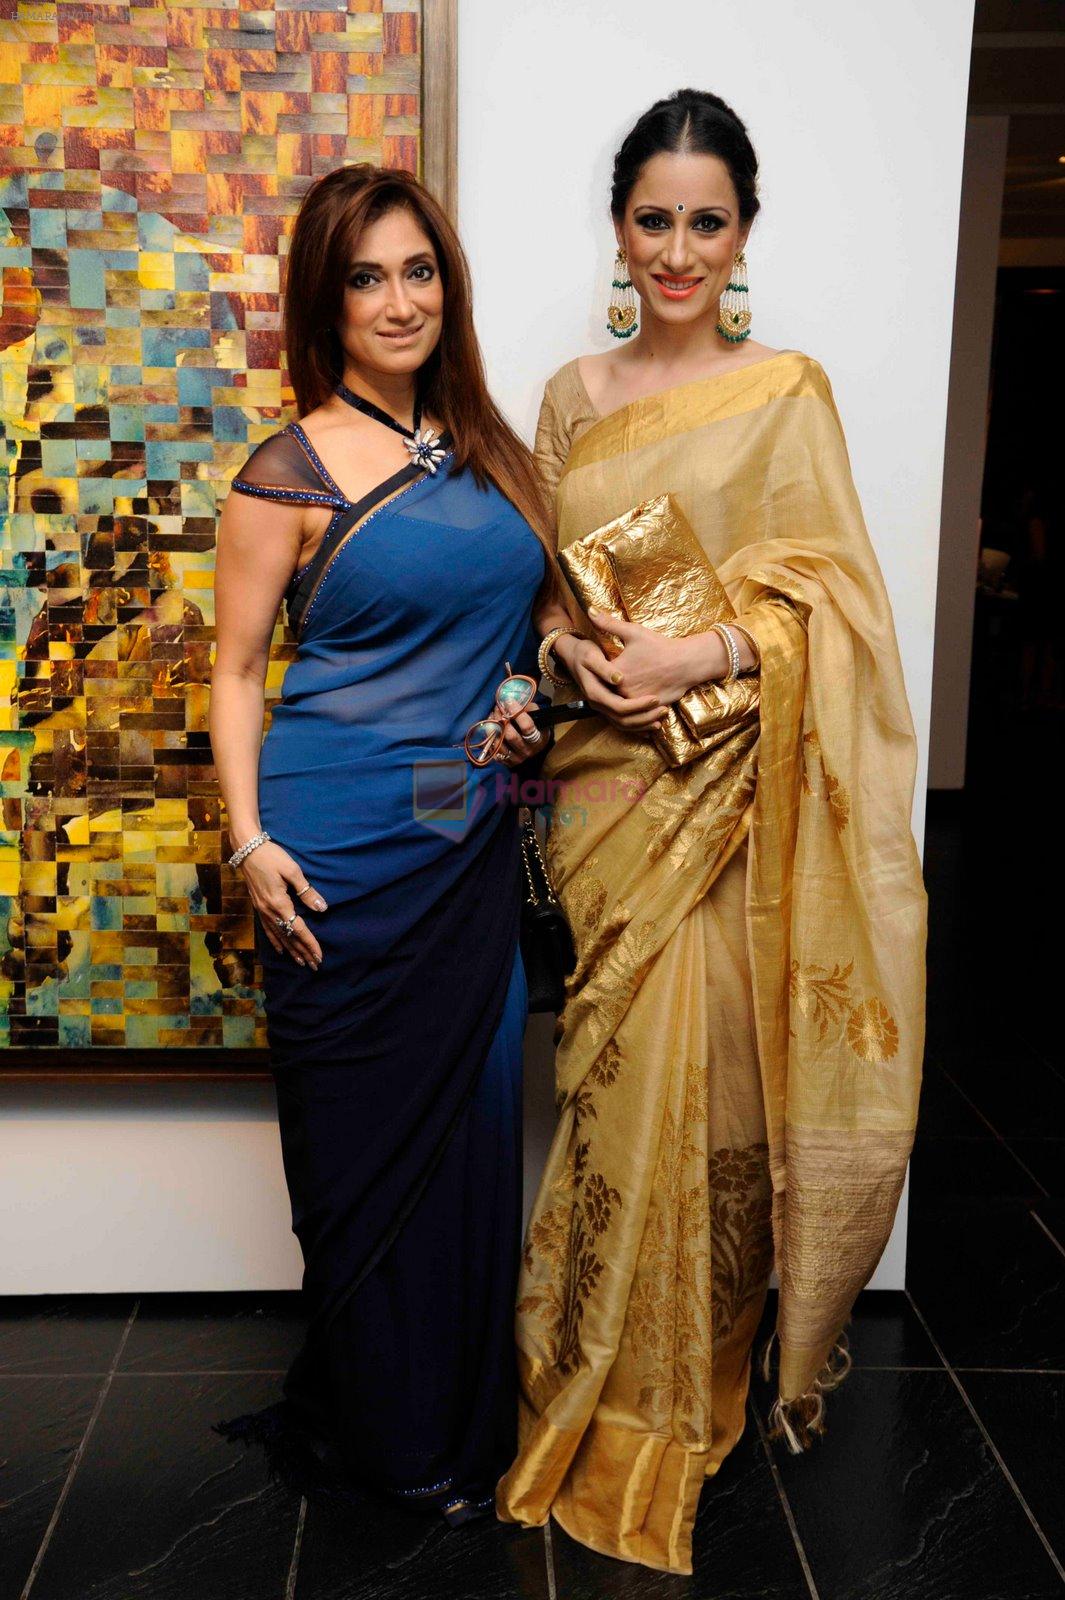 Lucky Morani Rouble Nagi at Khushii art event in Tao Art Gallery on 22nd Nov 2014